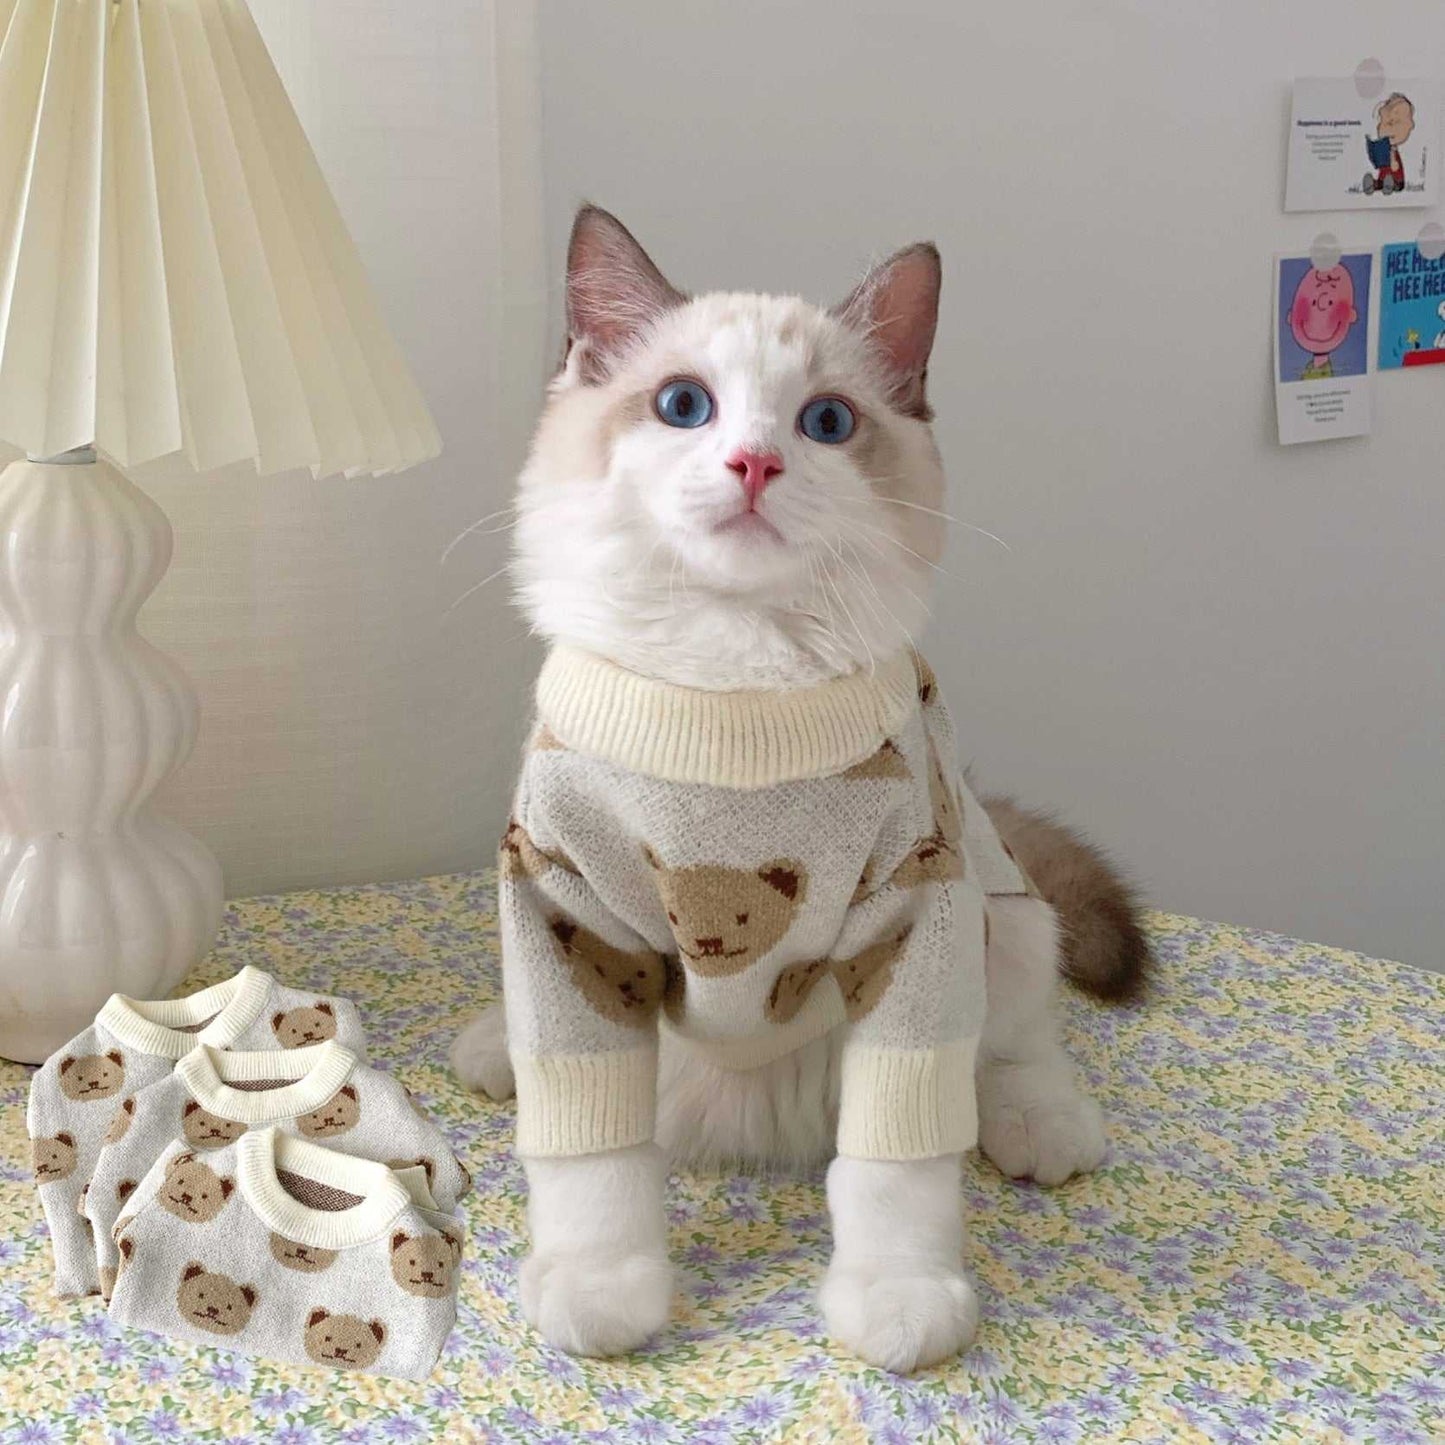 a cute cat knit sweater with bear design